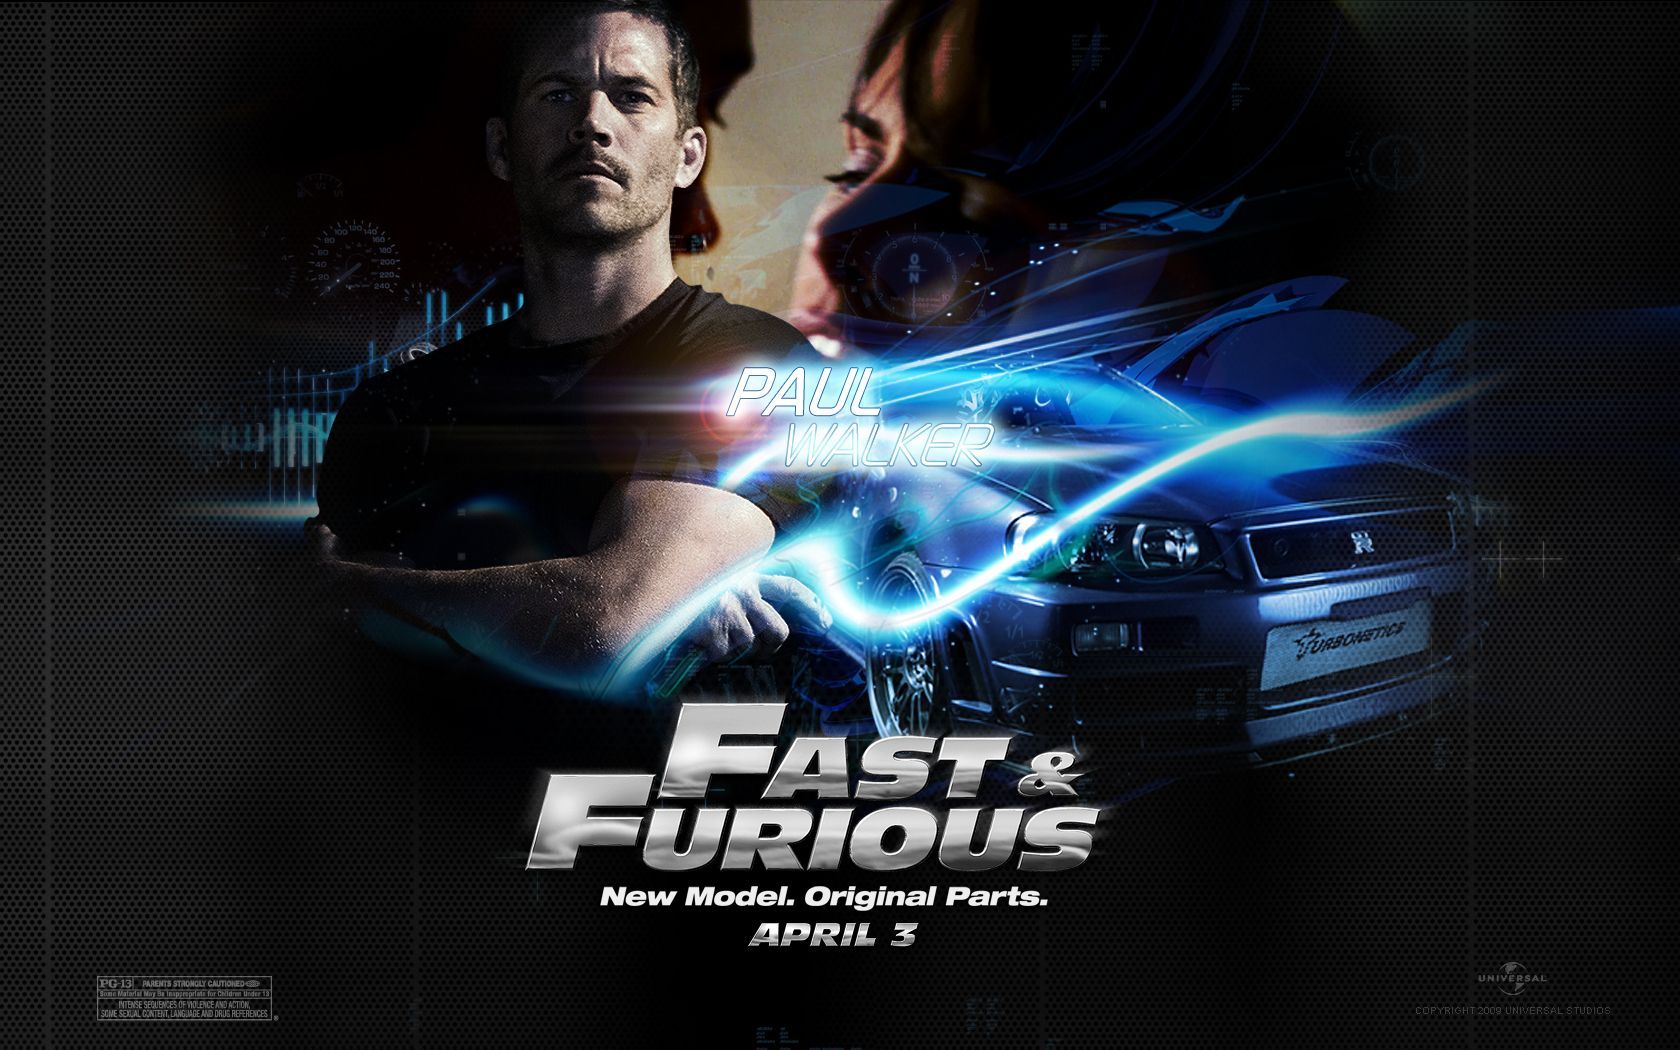 Fast and furious 7 cars wallpapers Free full hd wallpapers for